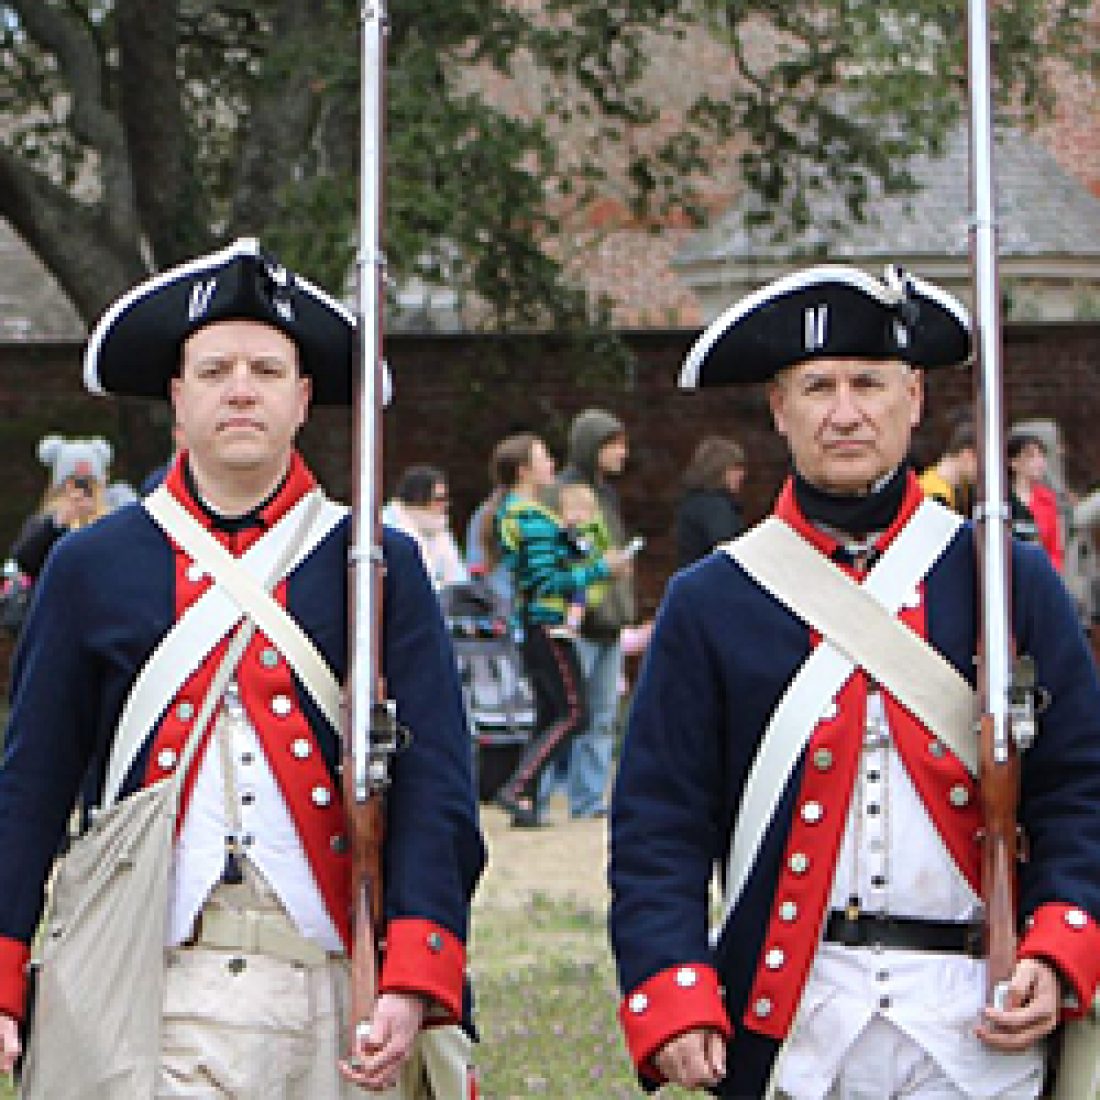 Two male actors dressed as American Revolution soldiers